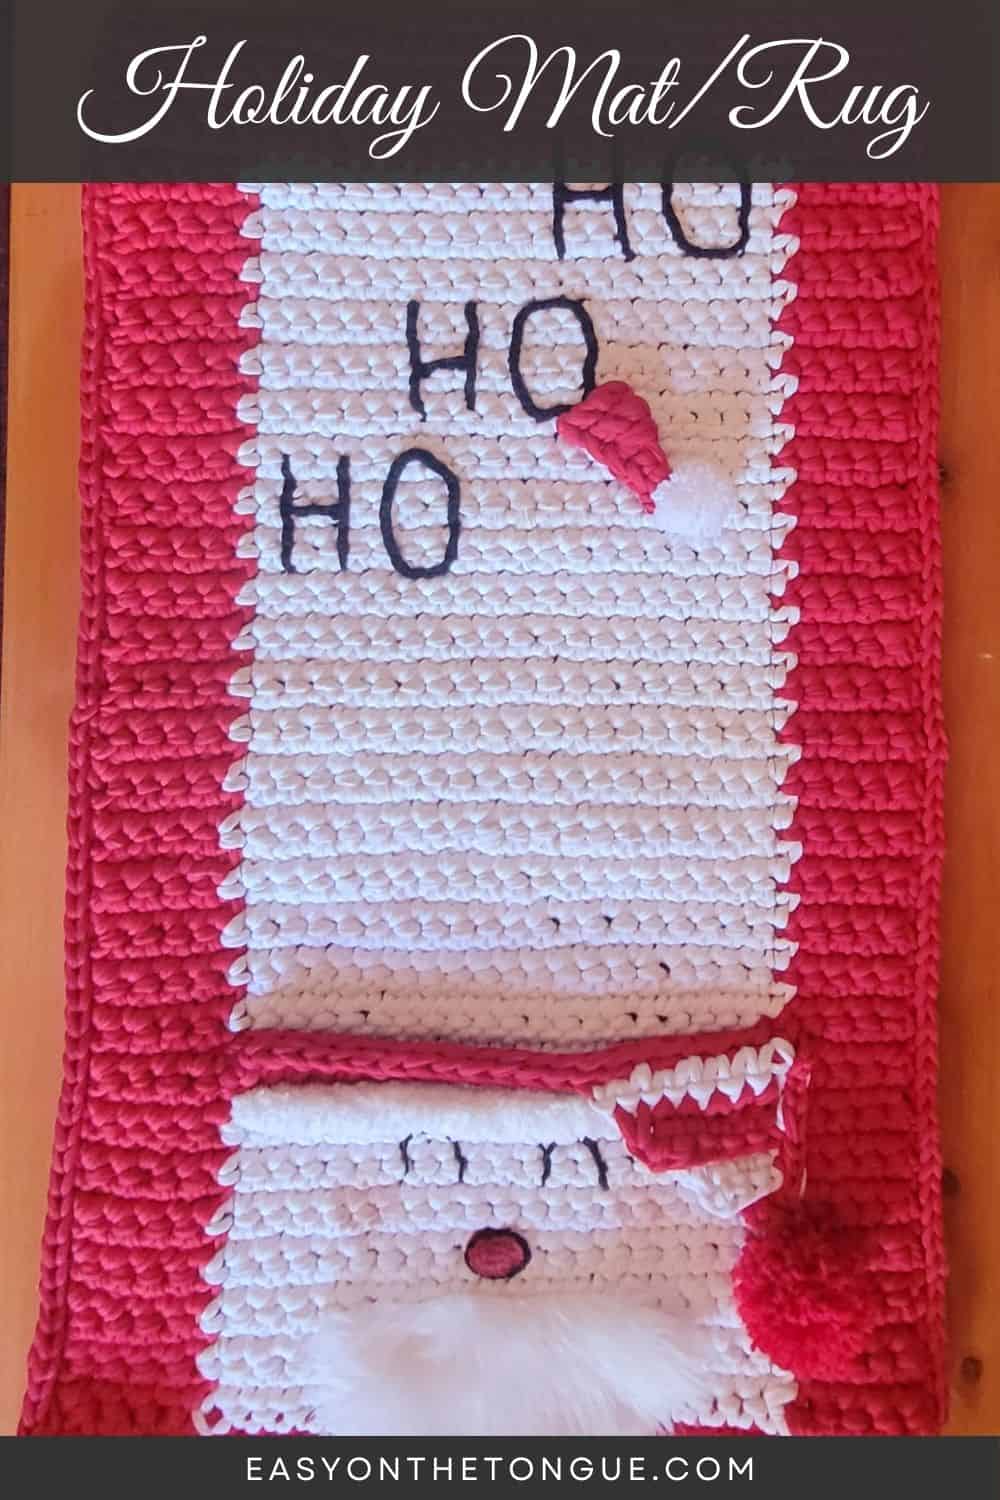 Crochet a Holiday bath mat or rug or use it as a table runner free pattern on easyonthetongue.com2  Crochet A Santa Christmas rug or table runner (free pattern)